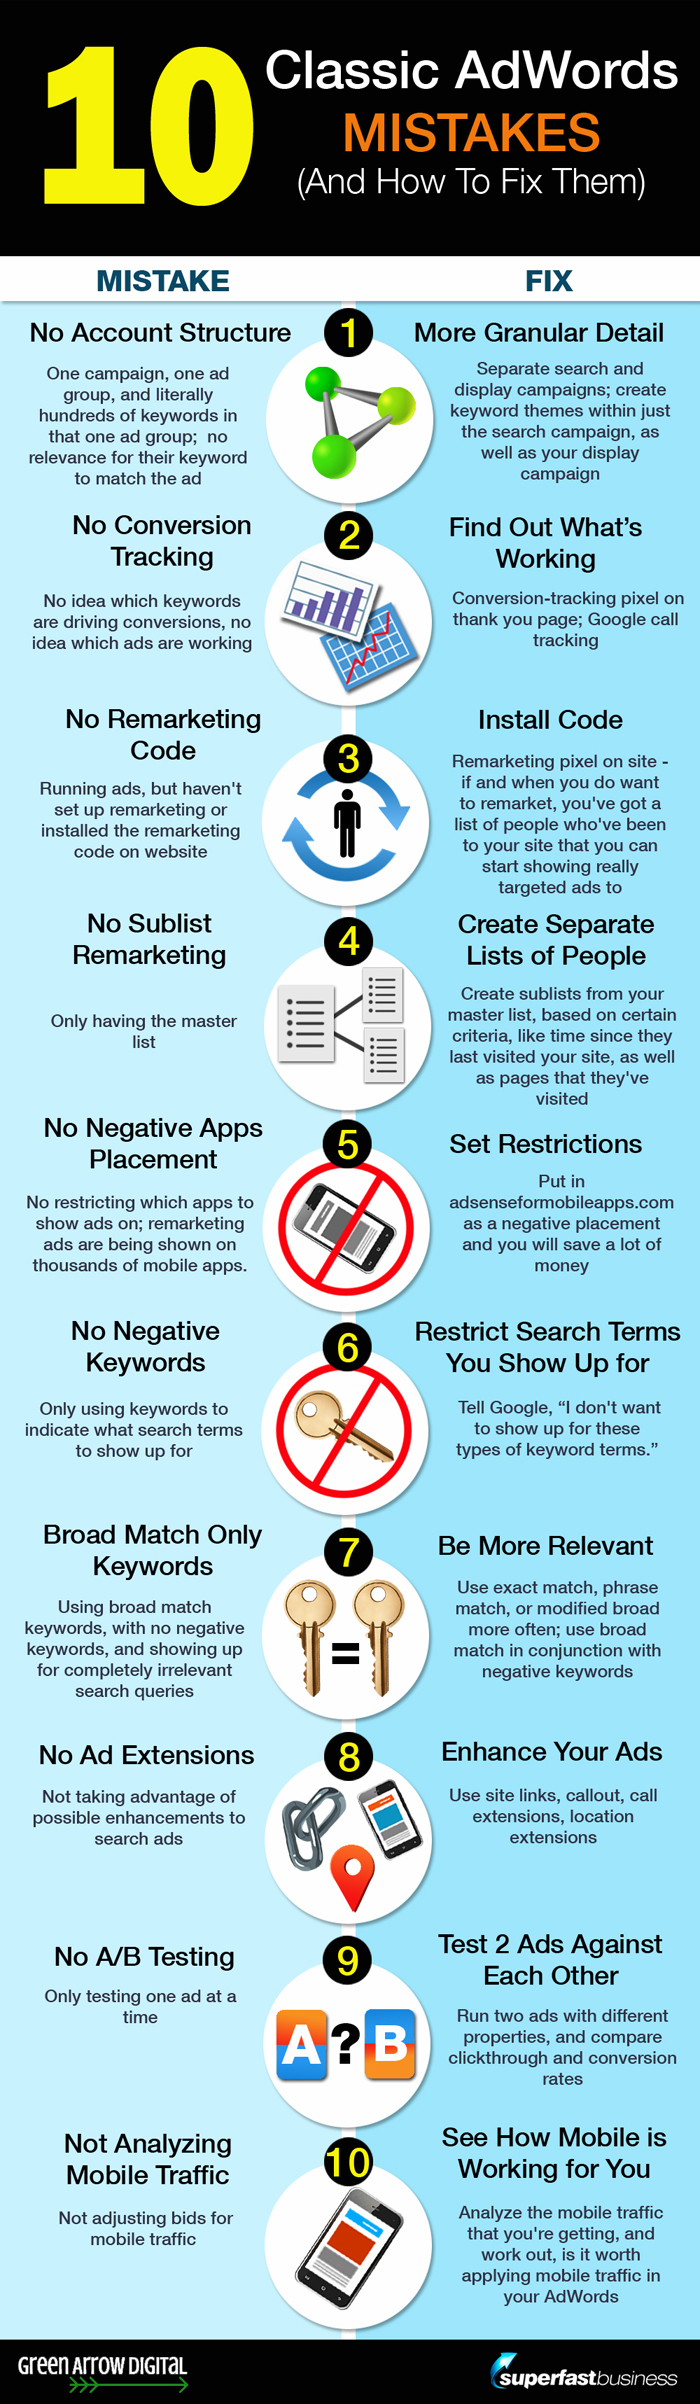 10 Classic AdWords Mistakes (And How To Fix Them) Infographic